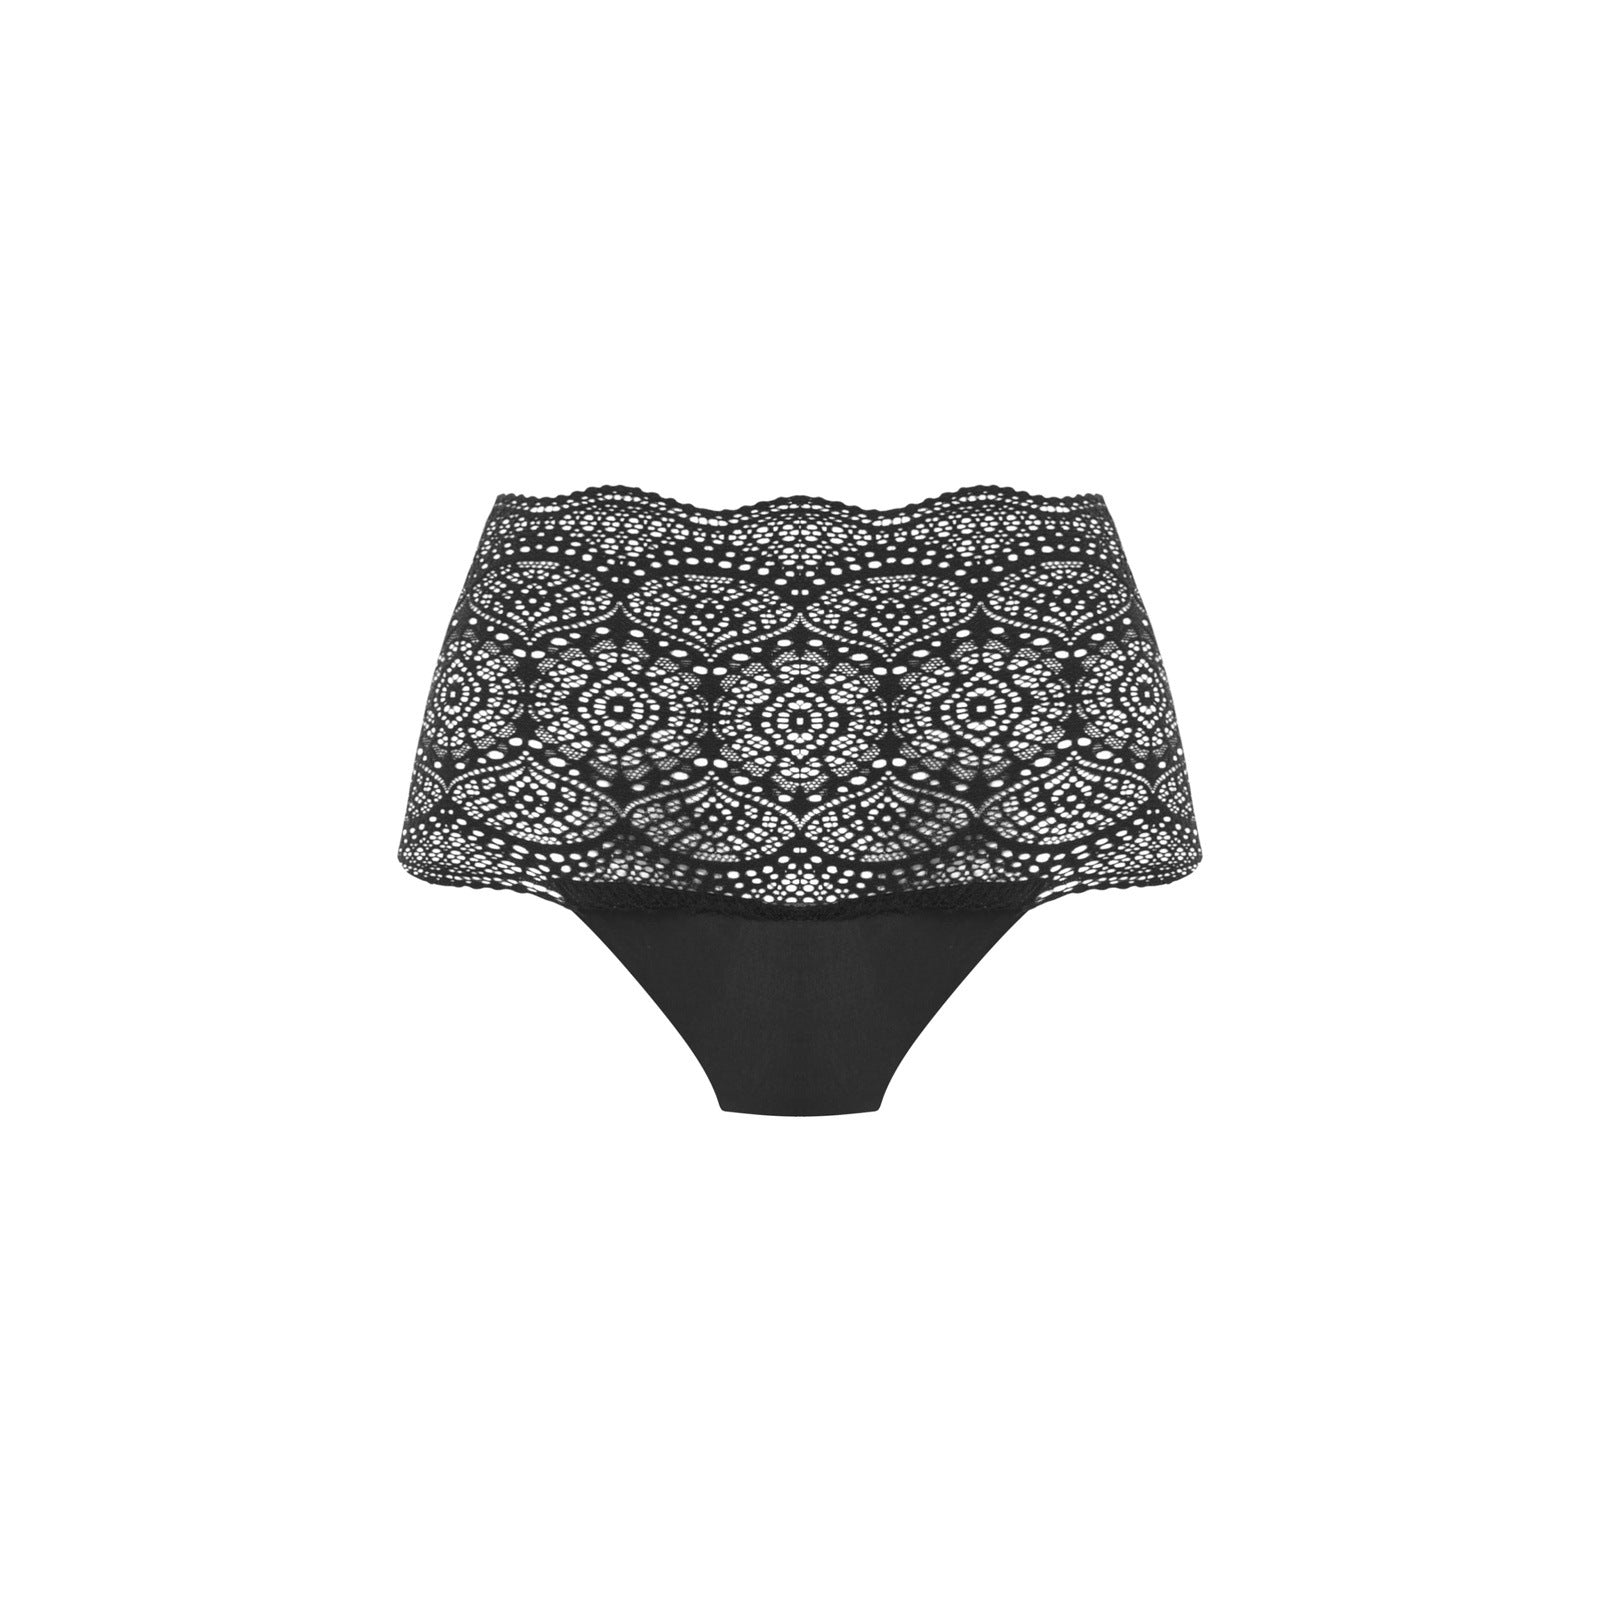 Fantasie Lace Ease Invisible Stretch Full Briefs - Black 2 Shaws Department Stores